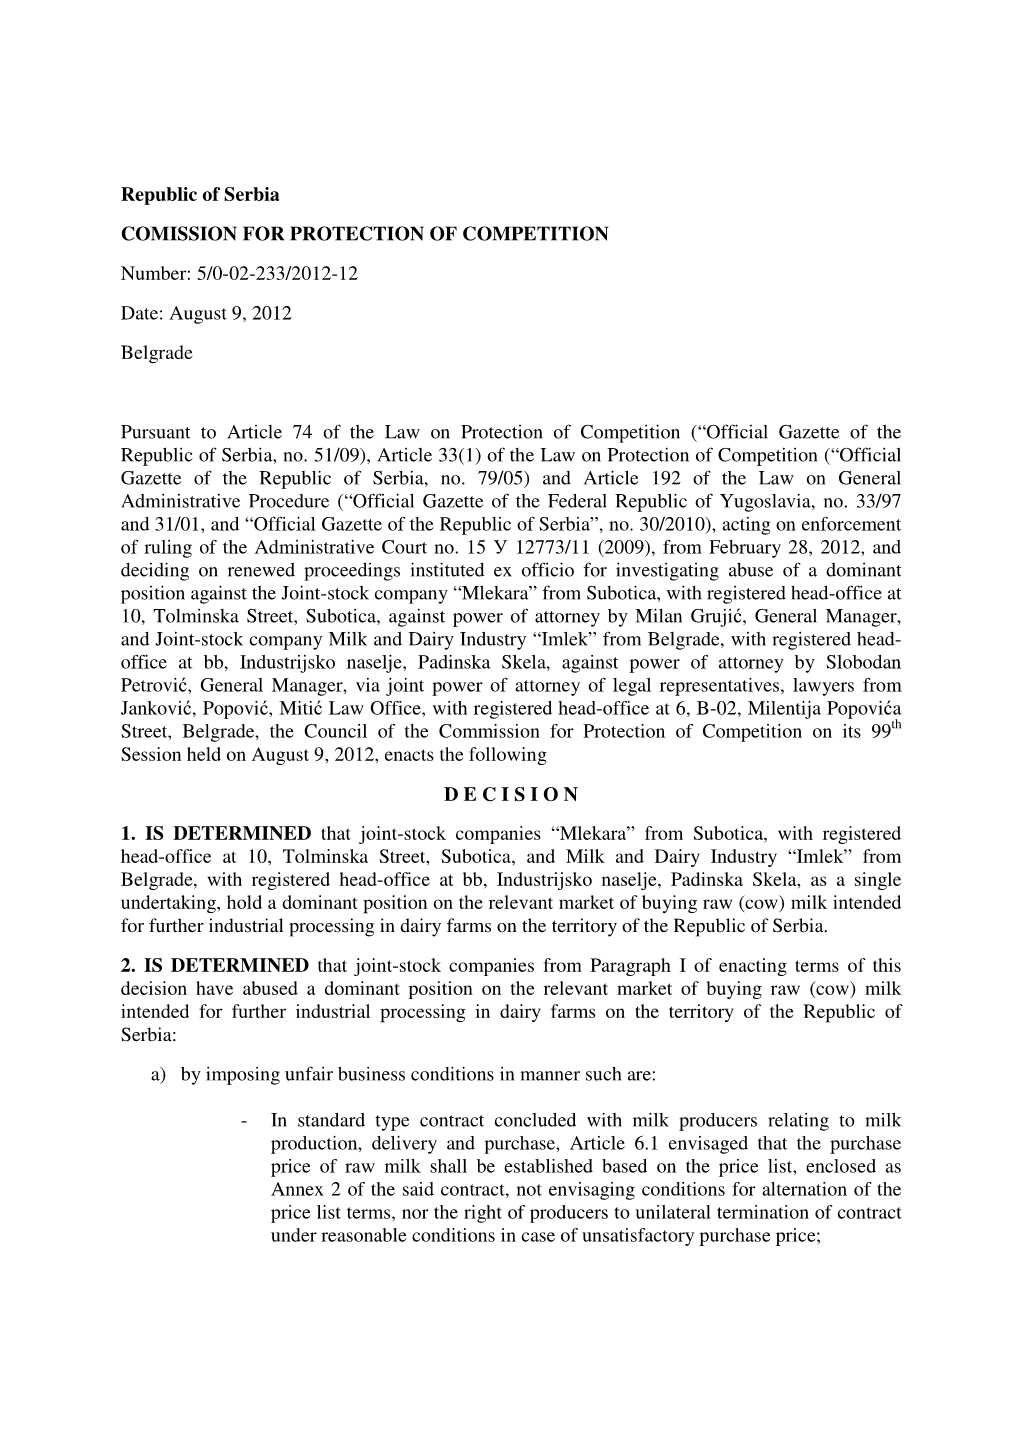 Republic of Serbia COMISSION for PROTECTION of COMPETITION Number: 5/0-02-233/2012-12 Date: August 9, 2012 Belgrade